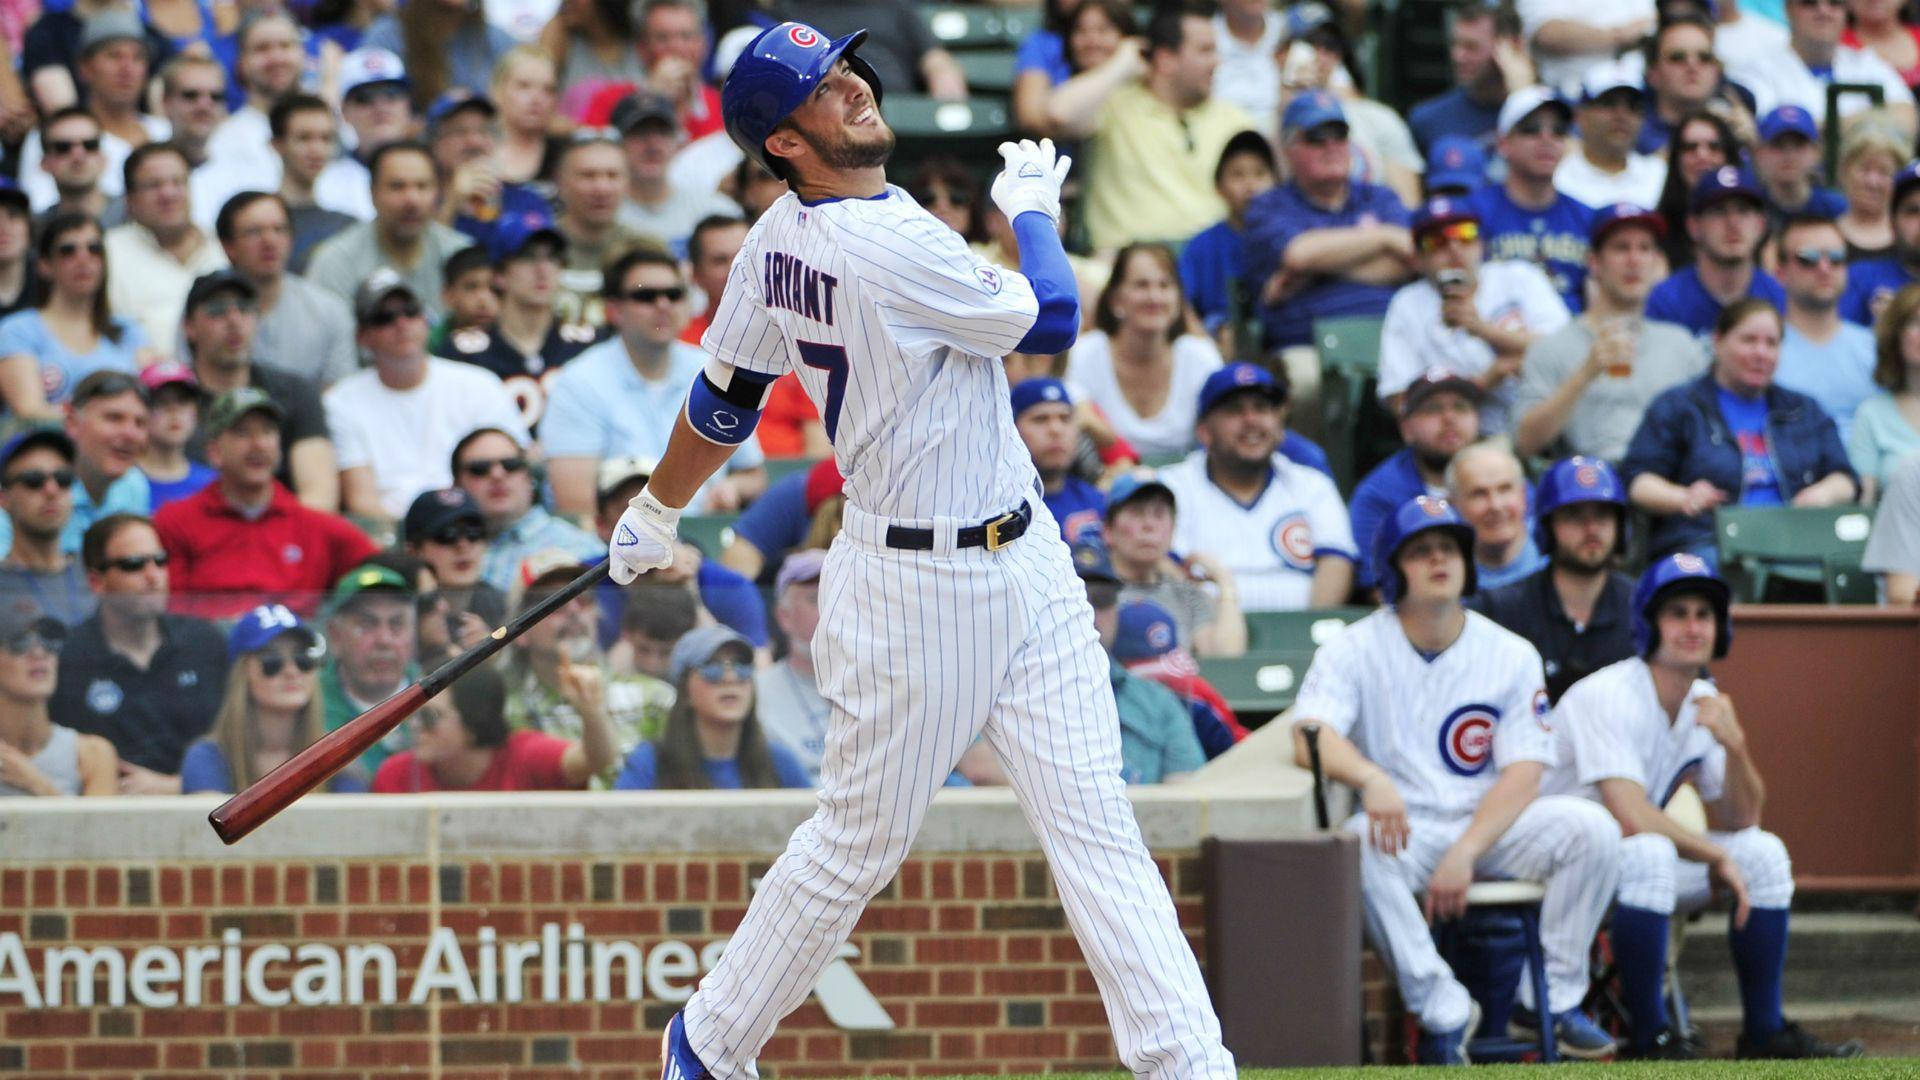 Download Kris Bryant Fist Bumping With Rizzo Wallpaper